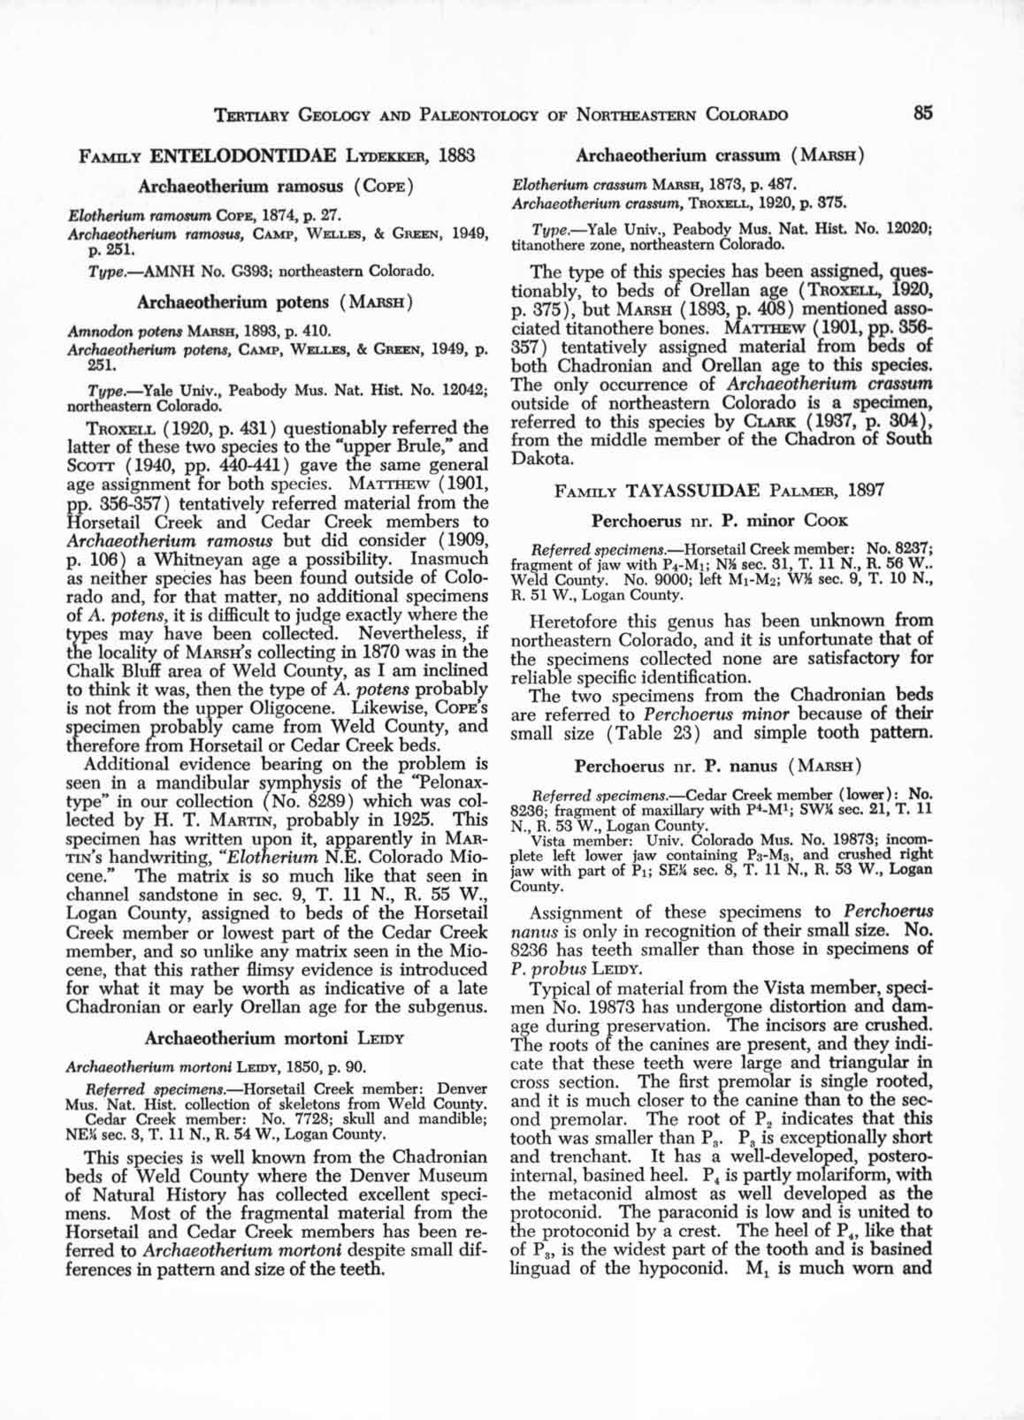 TERTIARY GEOLOGY AND PALEONTOLOGY OF NORTHEASTERN COLORADO 85 FAMILY ENTELODONTIDAE LYDEKKER, 1883 Archaeotherium ramosus ( COPE) Elotherium ramosum COPE, 1874, p. 27.